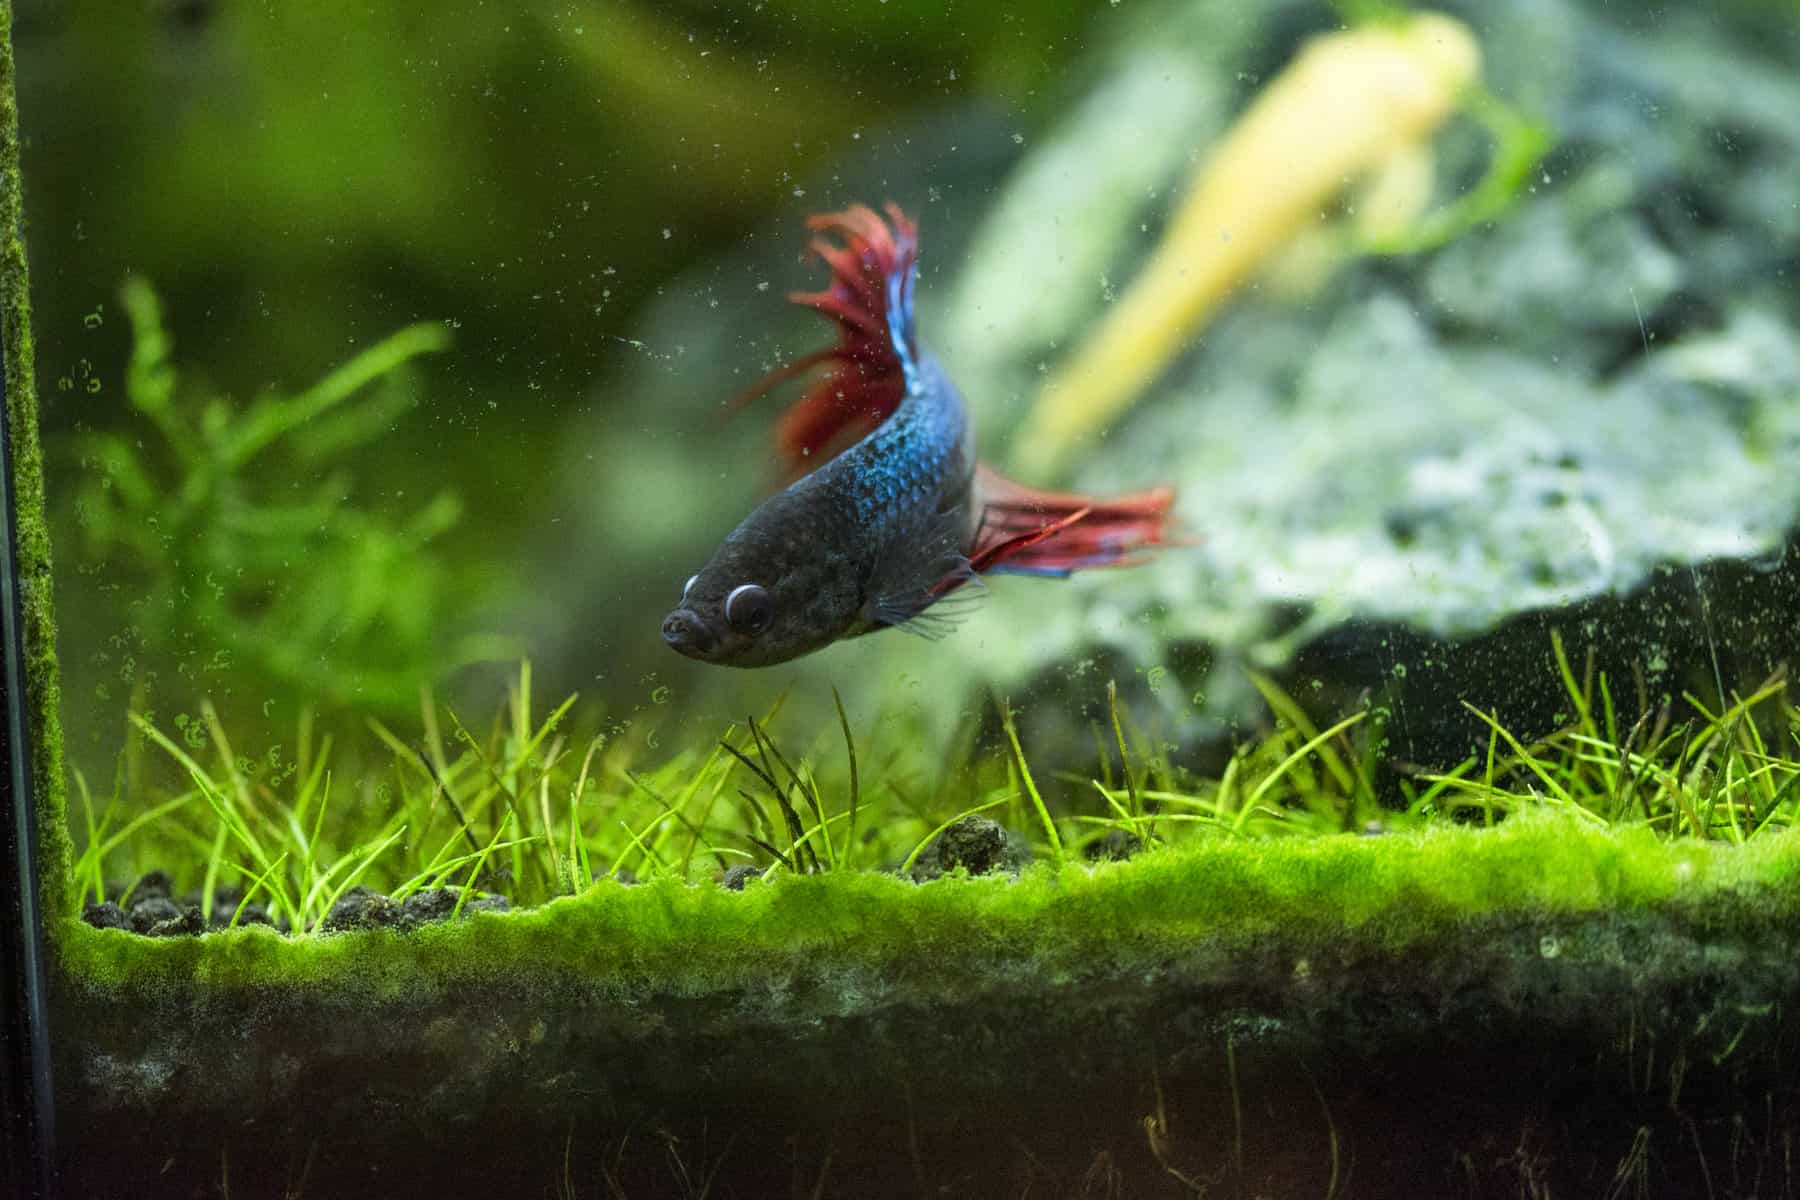 How To Tell if Betta Eggs Are Fertilized